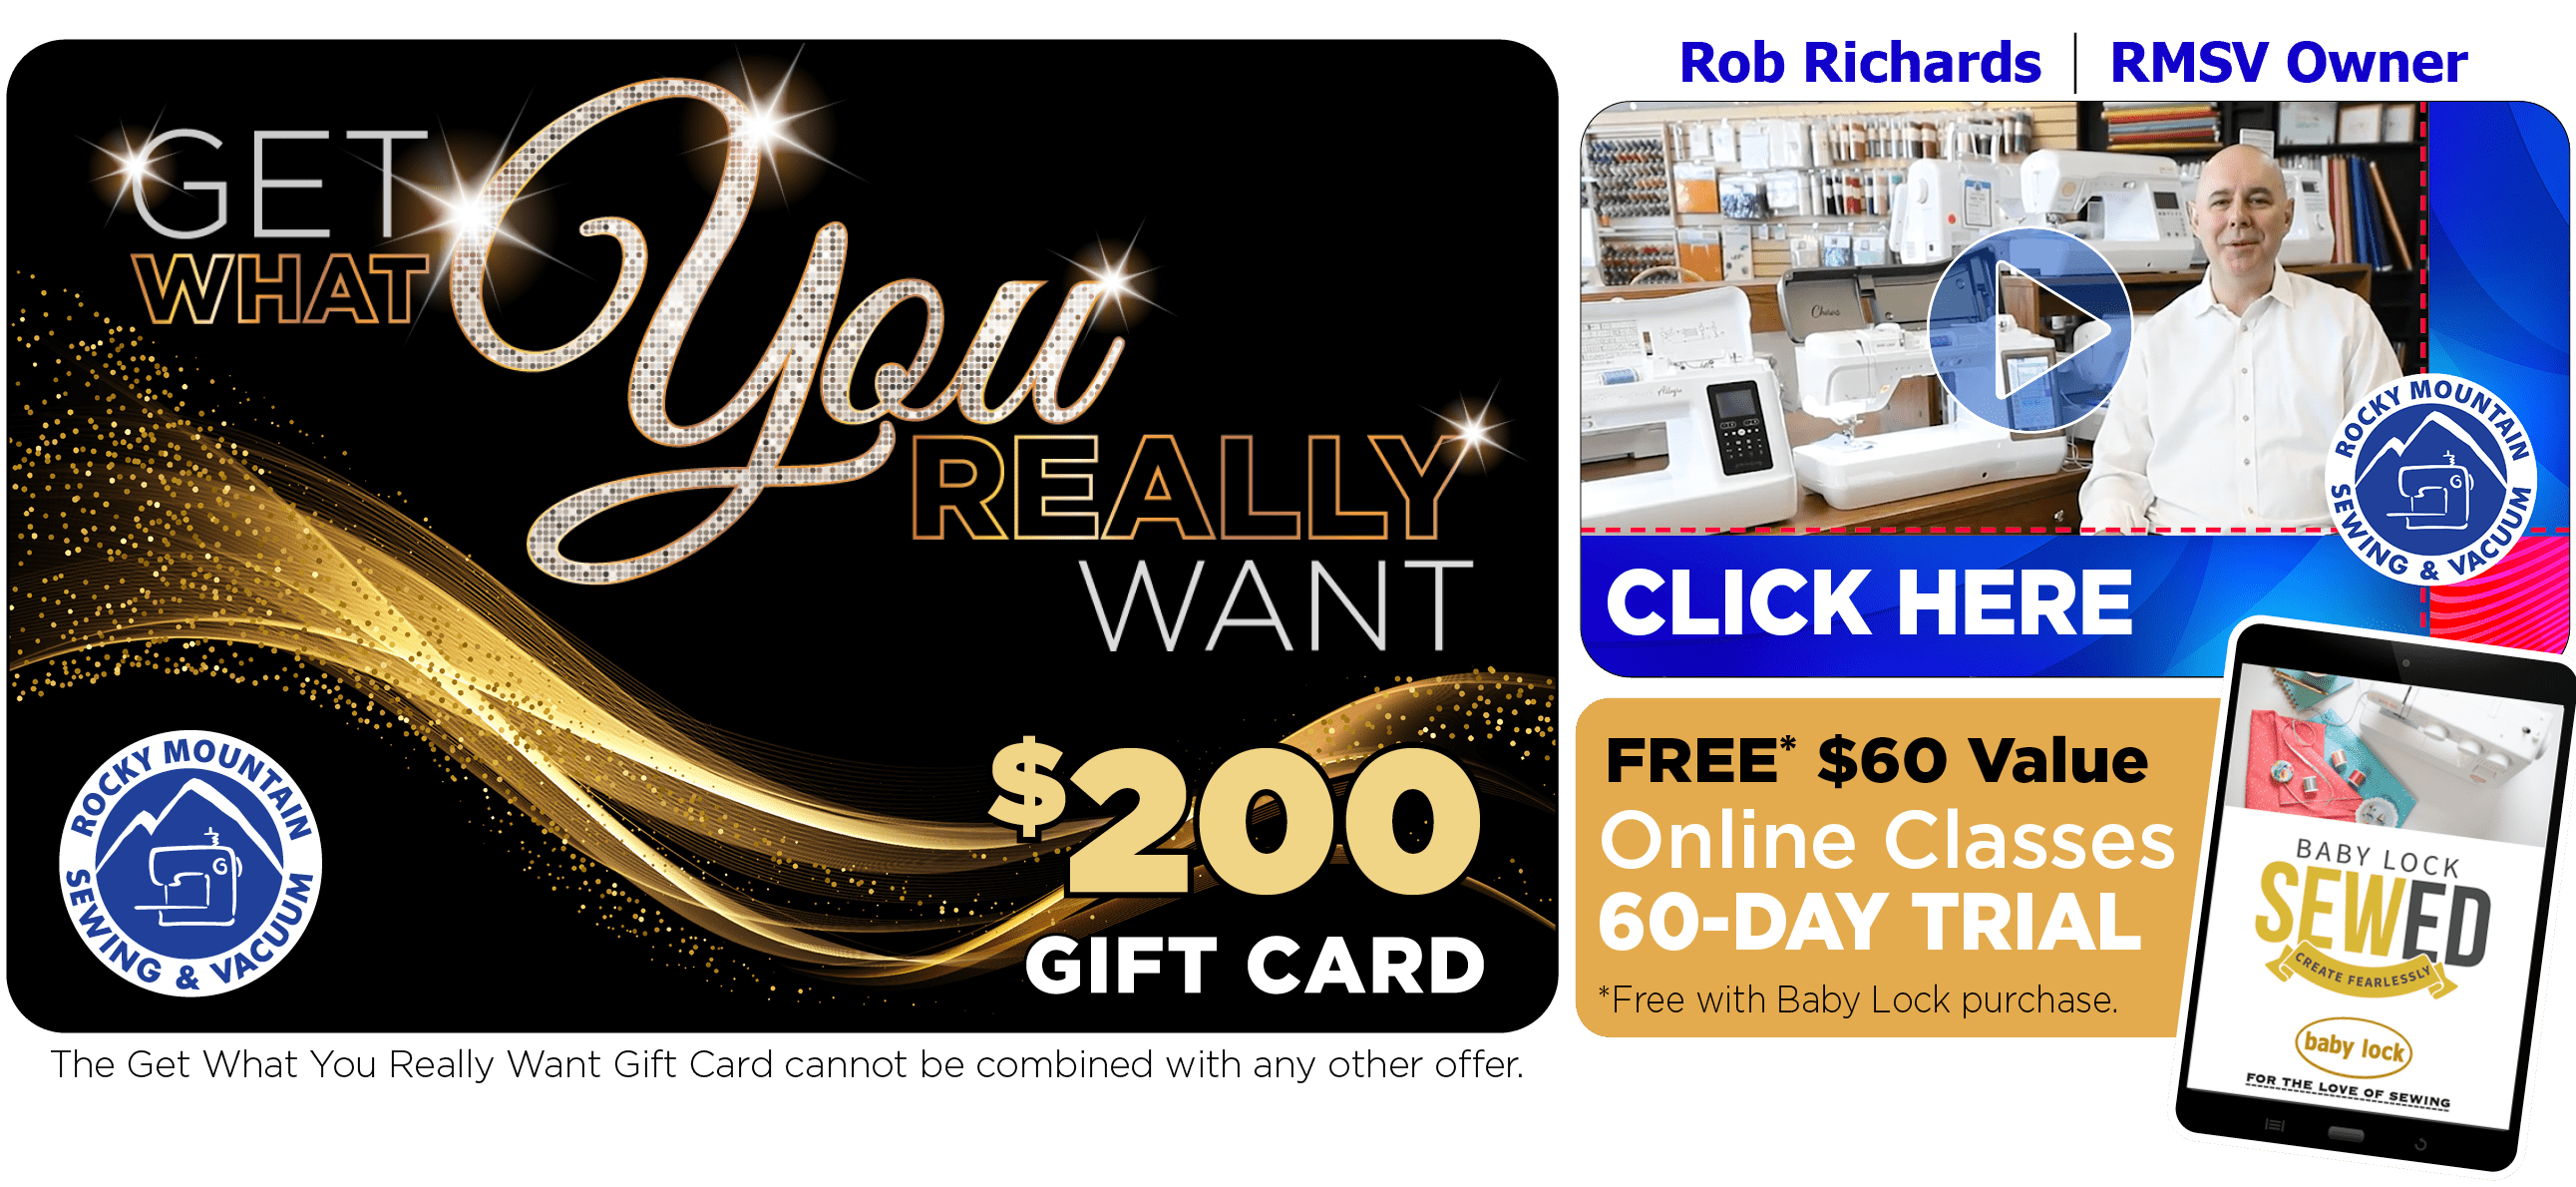 Get What You Really Want $200 Gift Card with Purchase